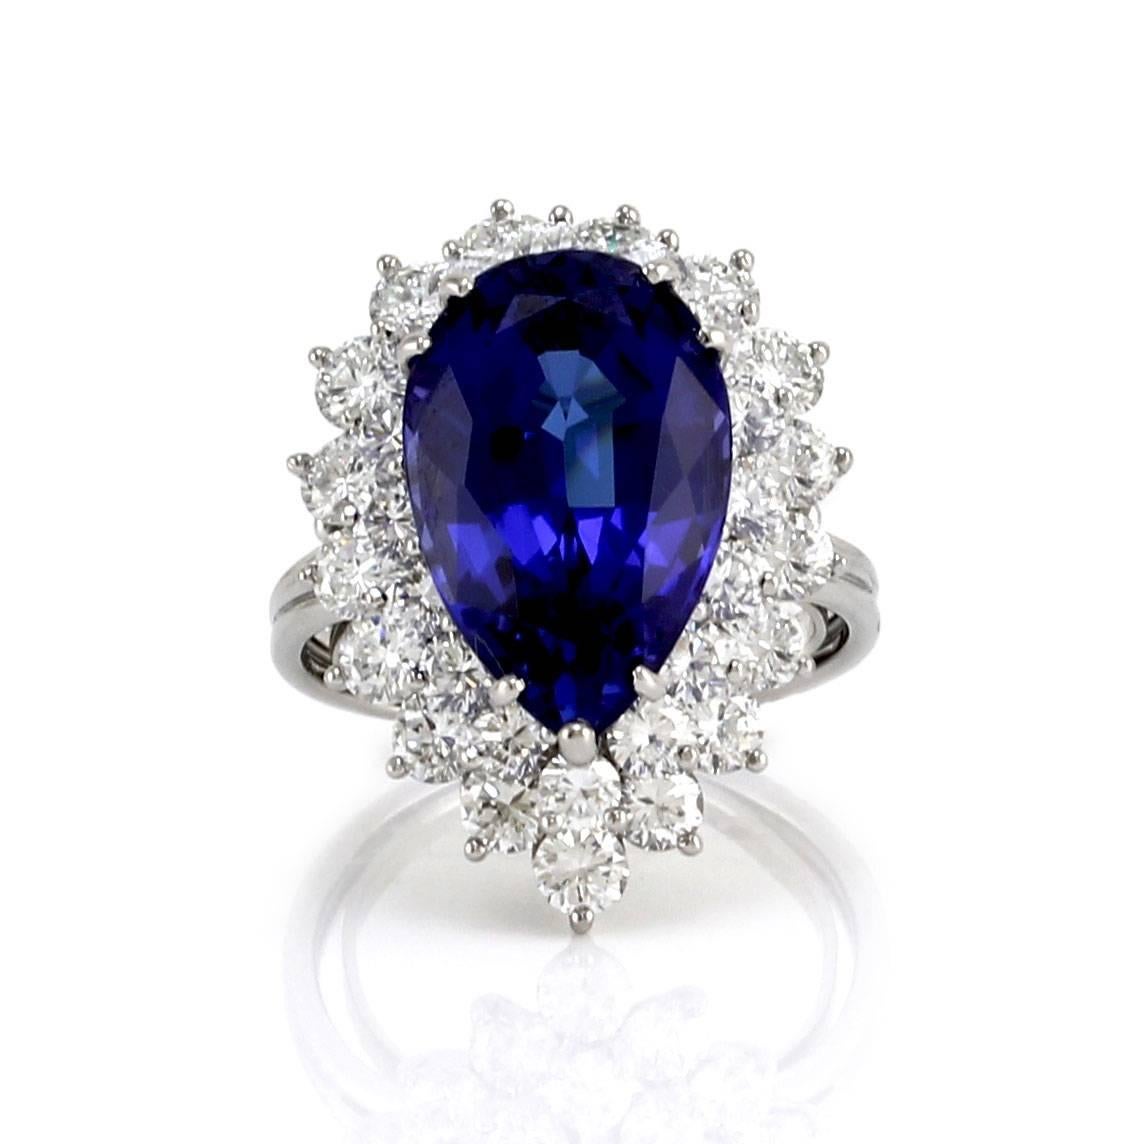 Tiffany & Co. pear tanzanite and diamond double halo ring in 900 platinum. There is one mixed cut tanzanite (7.75ct) with a brilliant cut crown and step cut pavilion. There are thirty-three round brilliant cut diamonds (2.84ctw) with a color of F-G